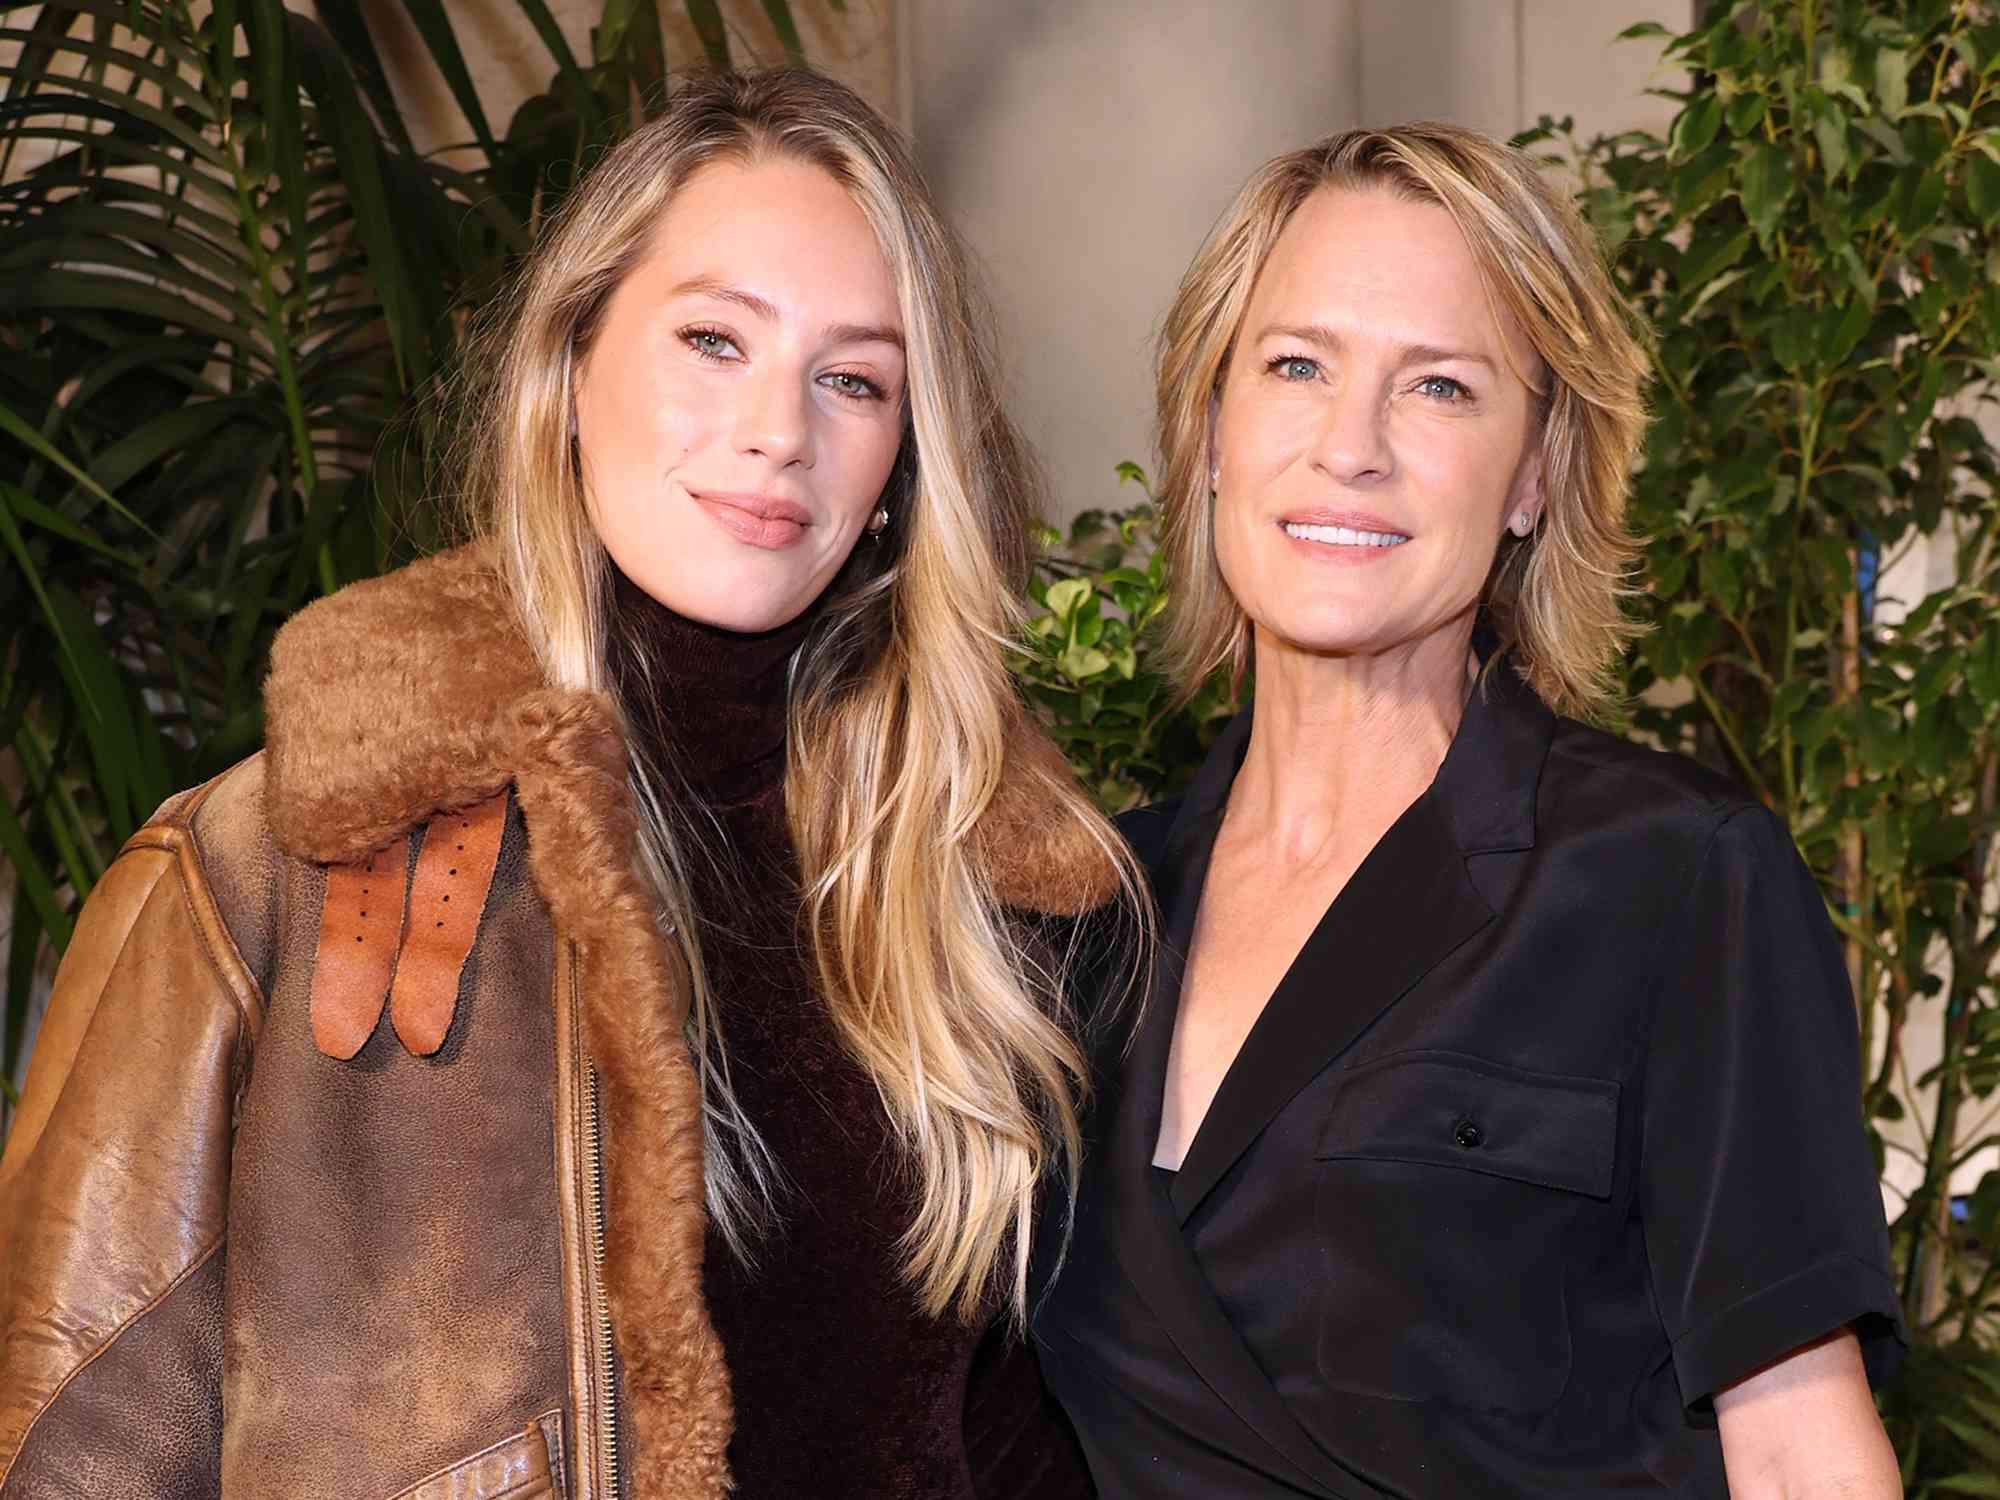 Dylan Penn and Robin Wright attend the Ralph Lauren SS23 Runway Show at The Huntington Library, Art Collections, and Botanical Gardens on October 13, 2022 in San Marino, California